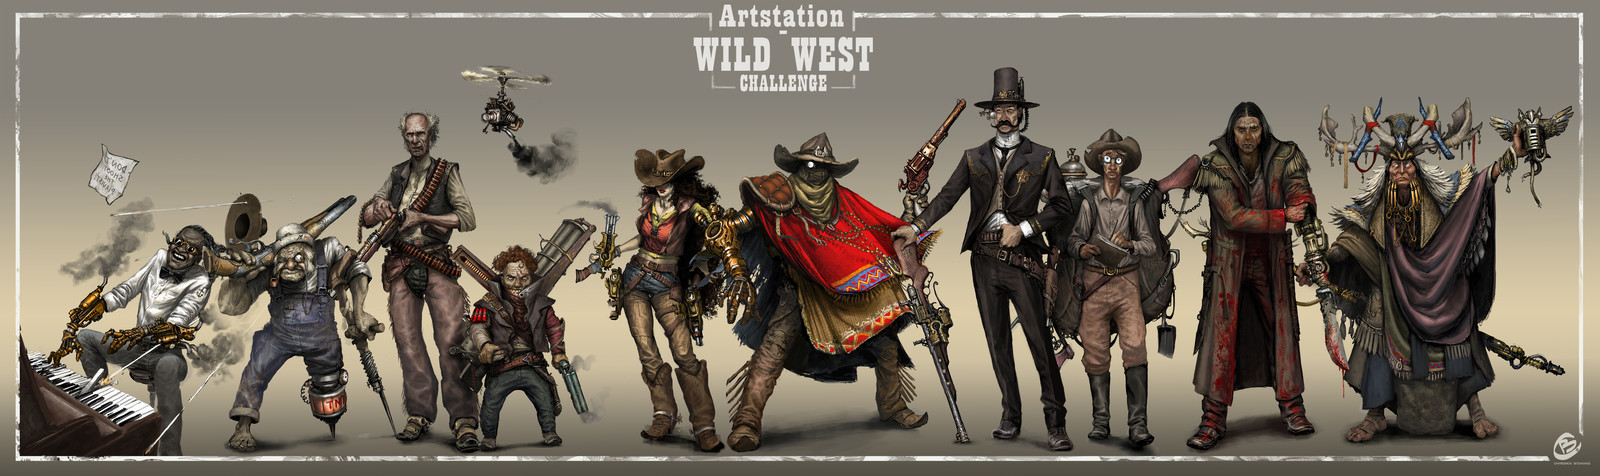 Wild West Challenge - character submission